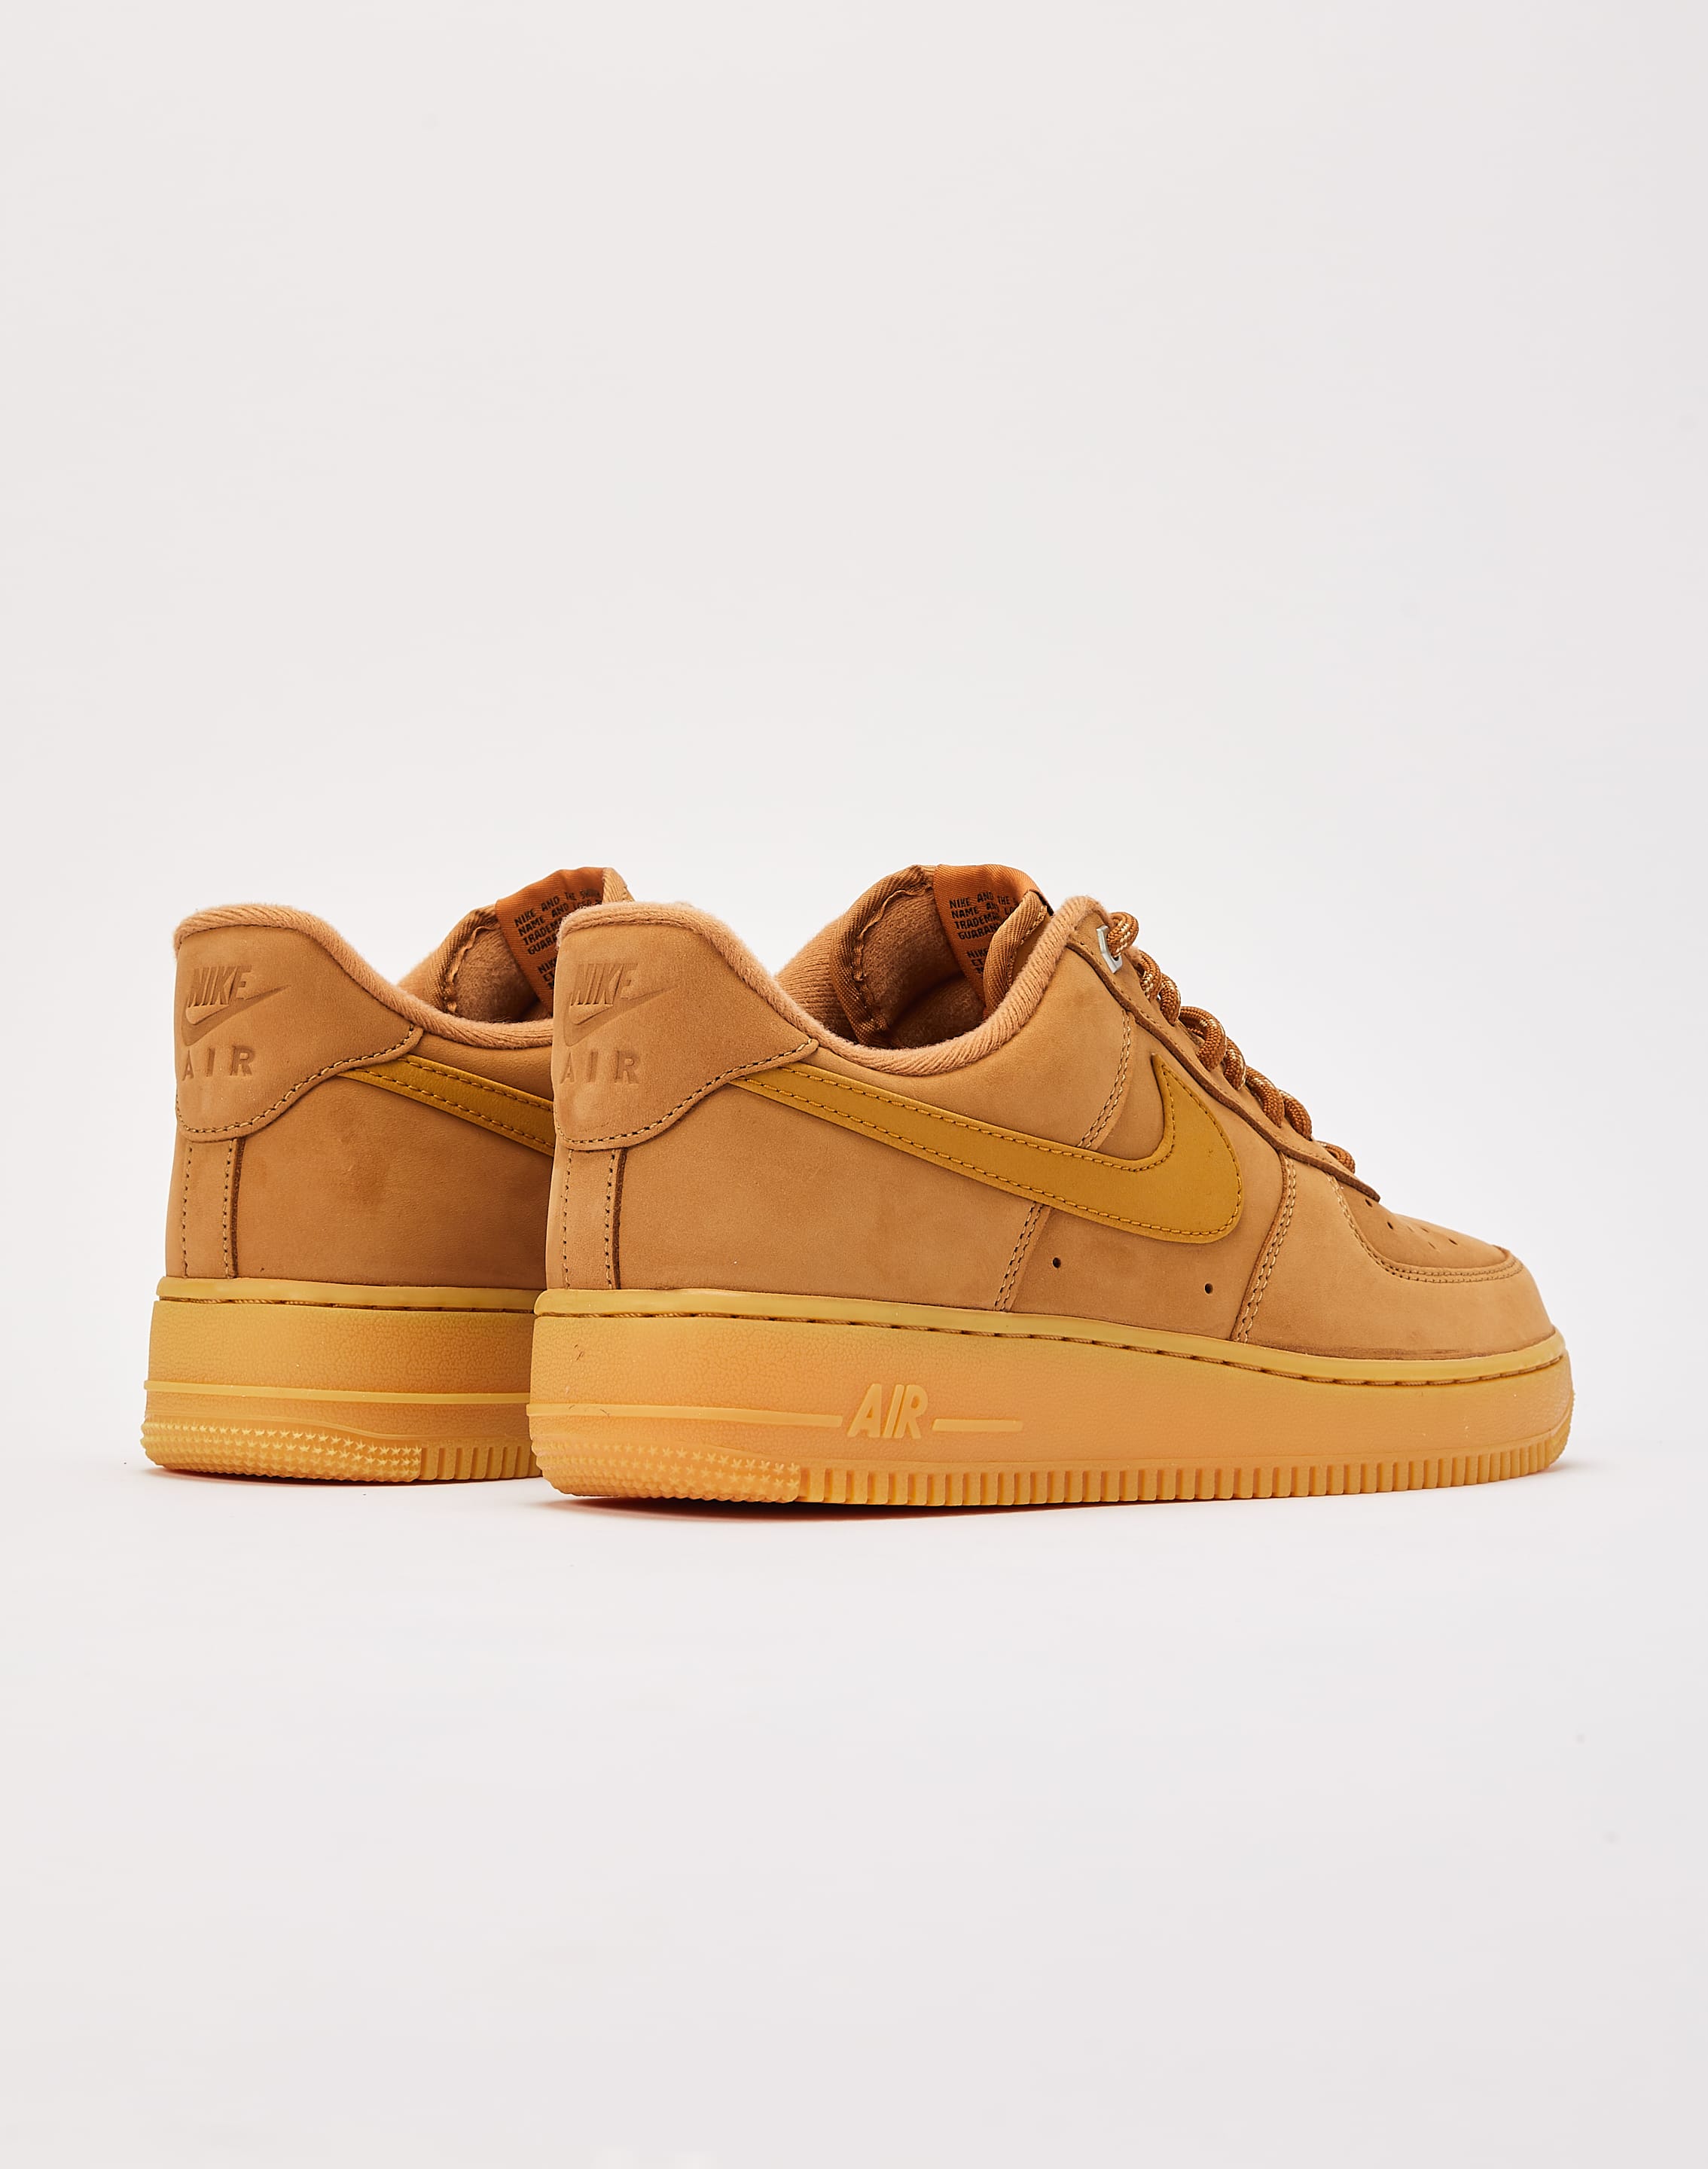 Men's Air Force 1 '07 WB Casual Shoes in Yellow/Flax Size 11.5 | Lace by Nike